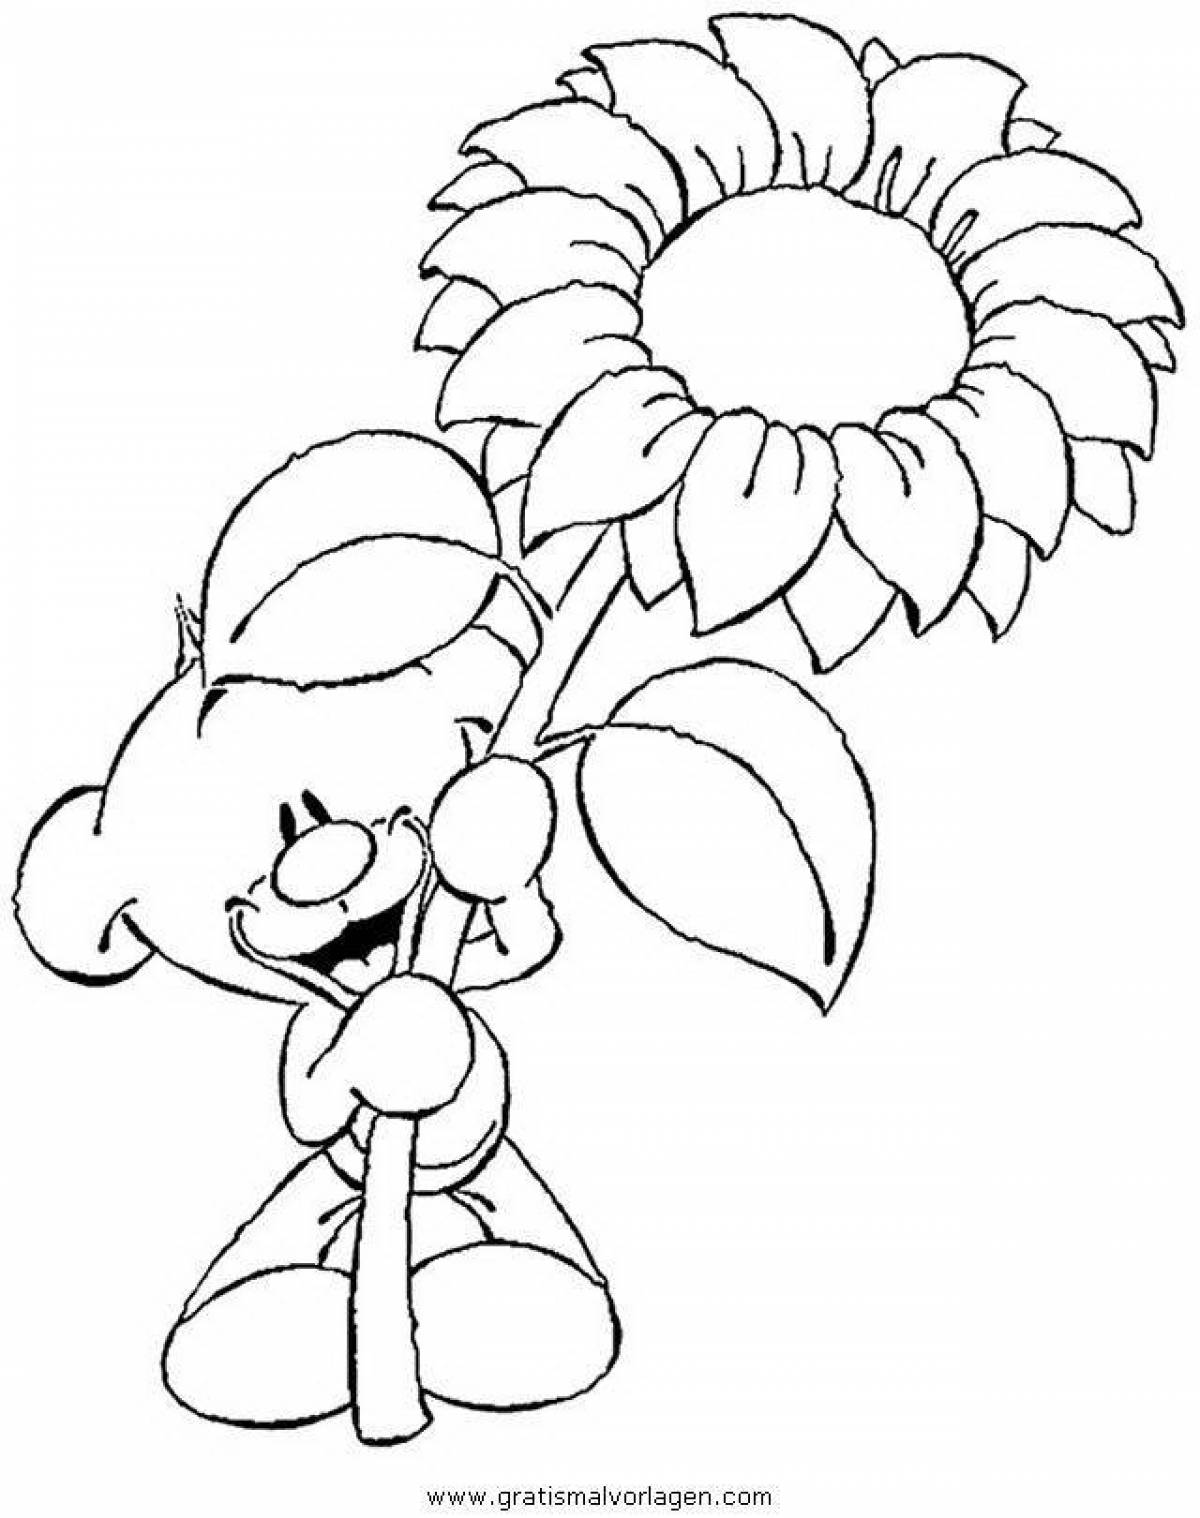 Color-wild thank you coloring page